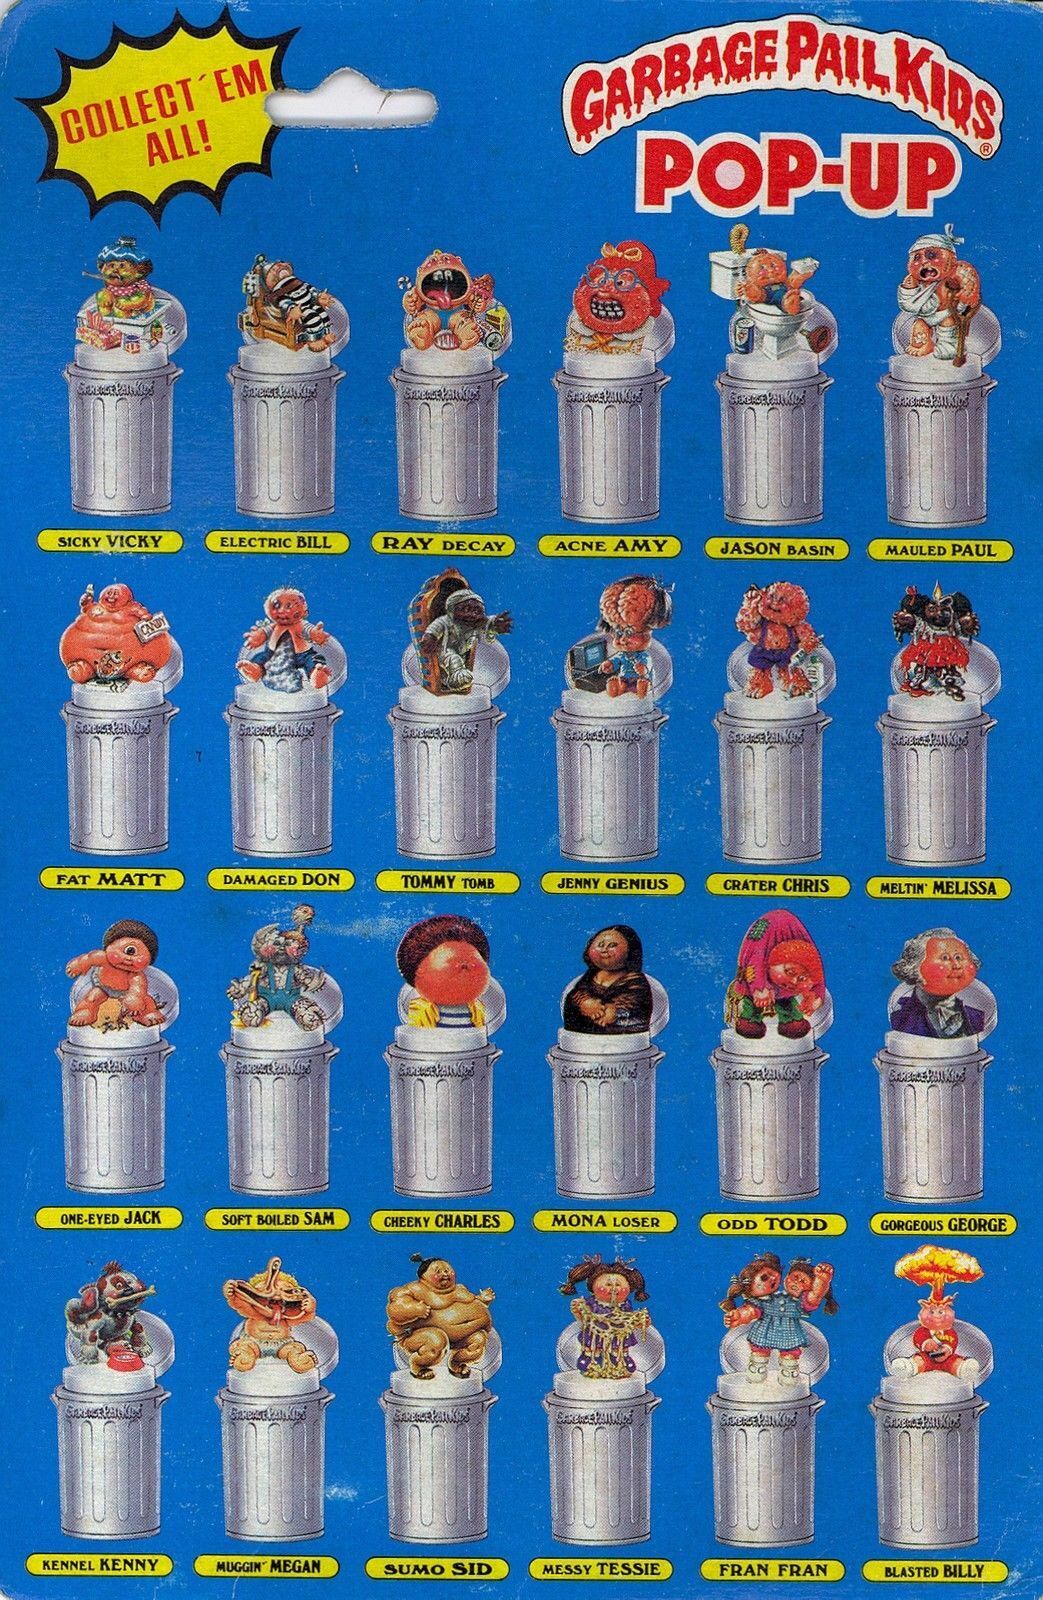 1985 Topps Imperial Toys GARBAGE PAIL KIDS SY CLOPS Pop-Up GPK Image 2